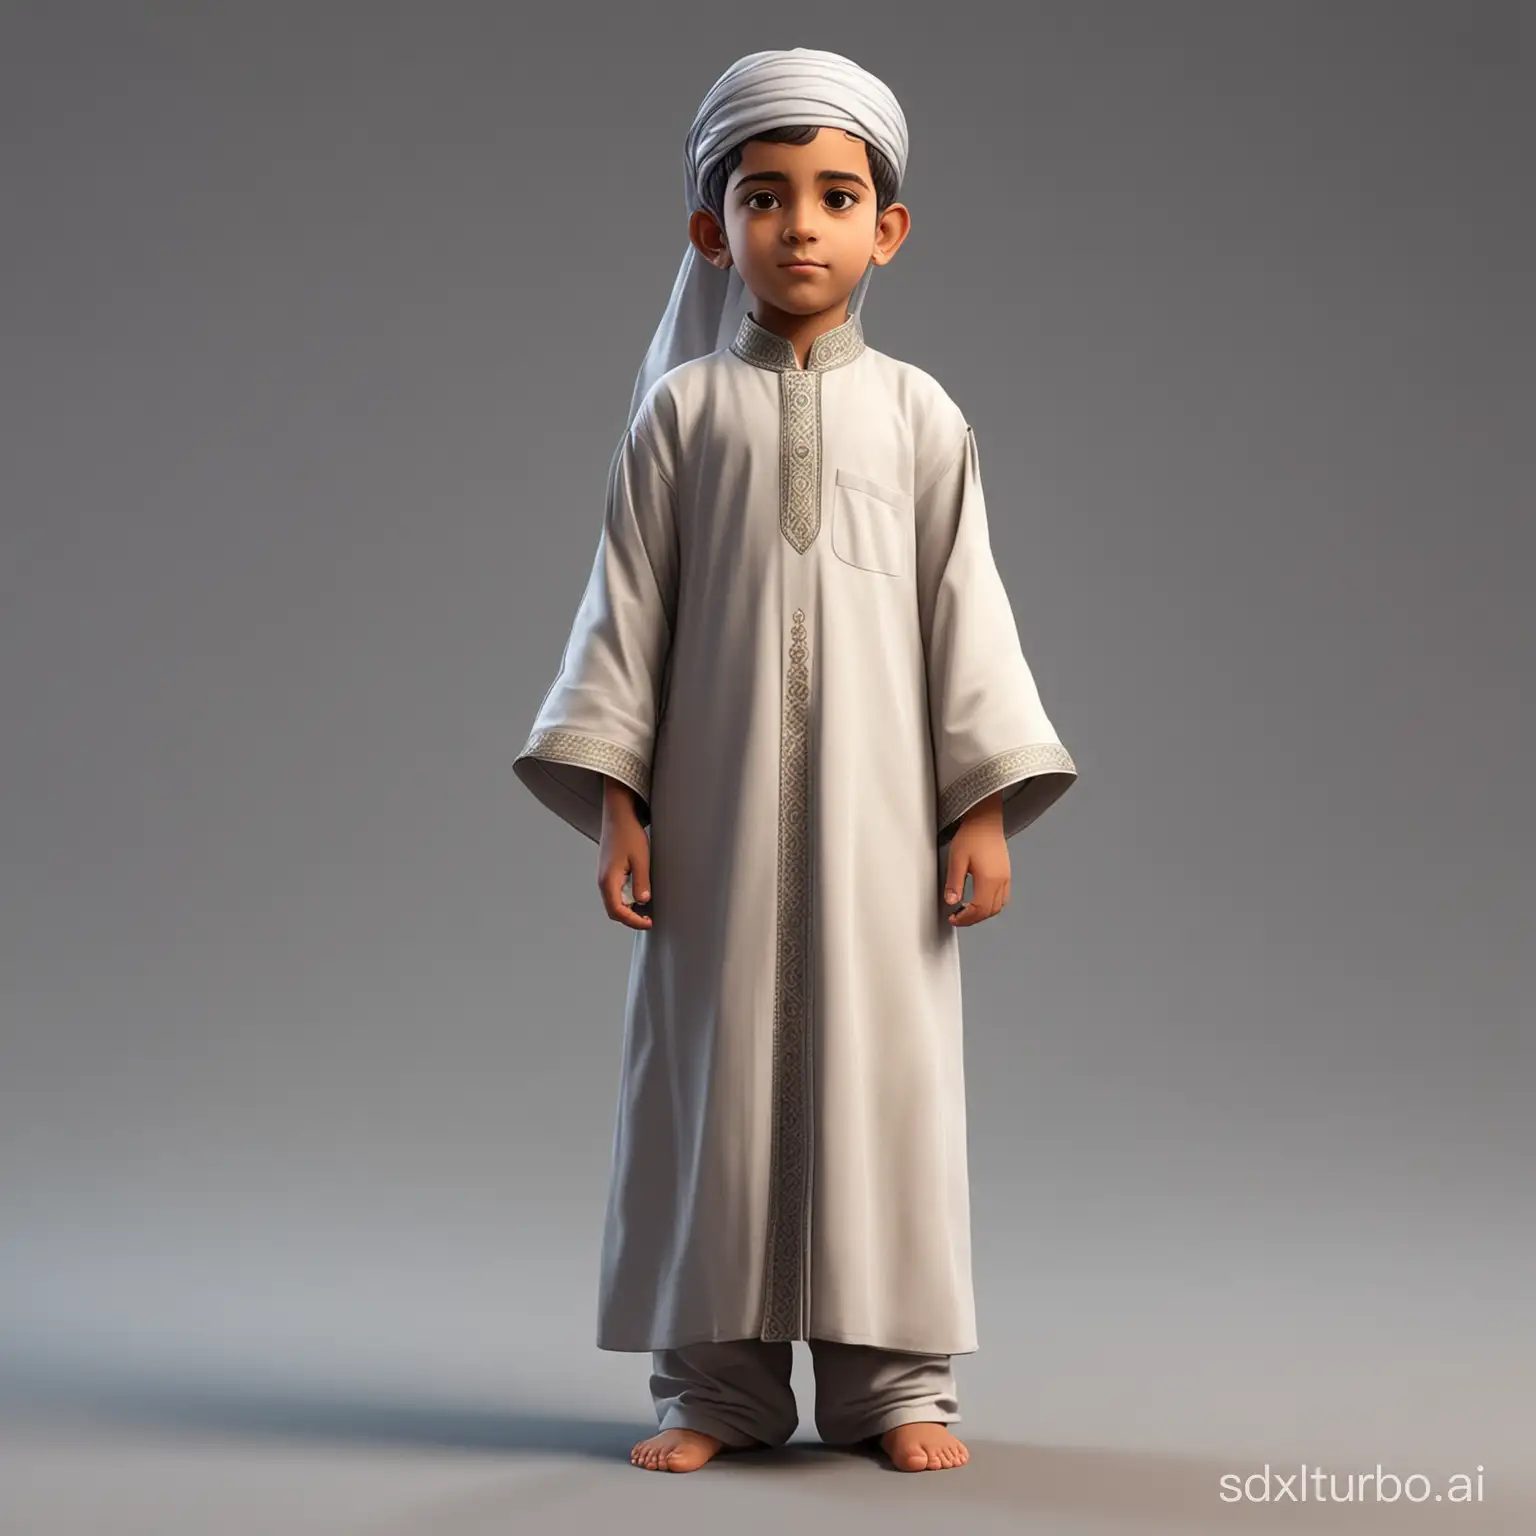 Little child masterpiece of boy muslim avatar wearing bisht, game character, stands at full height